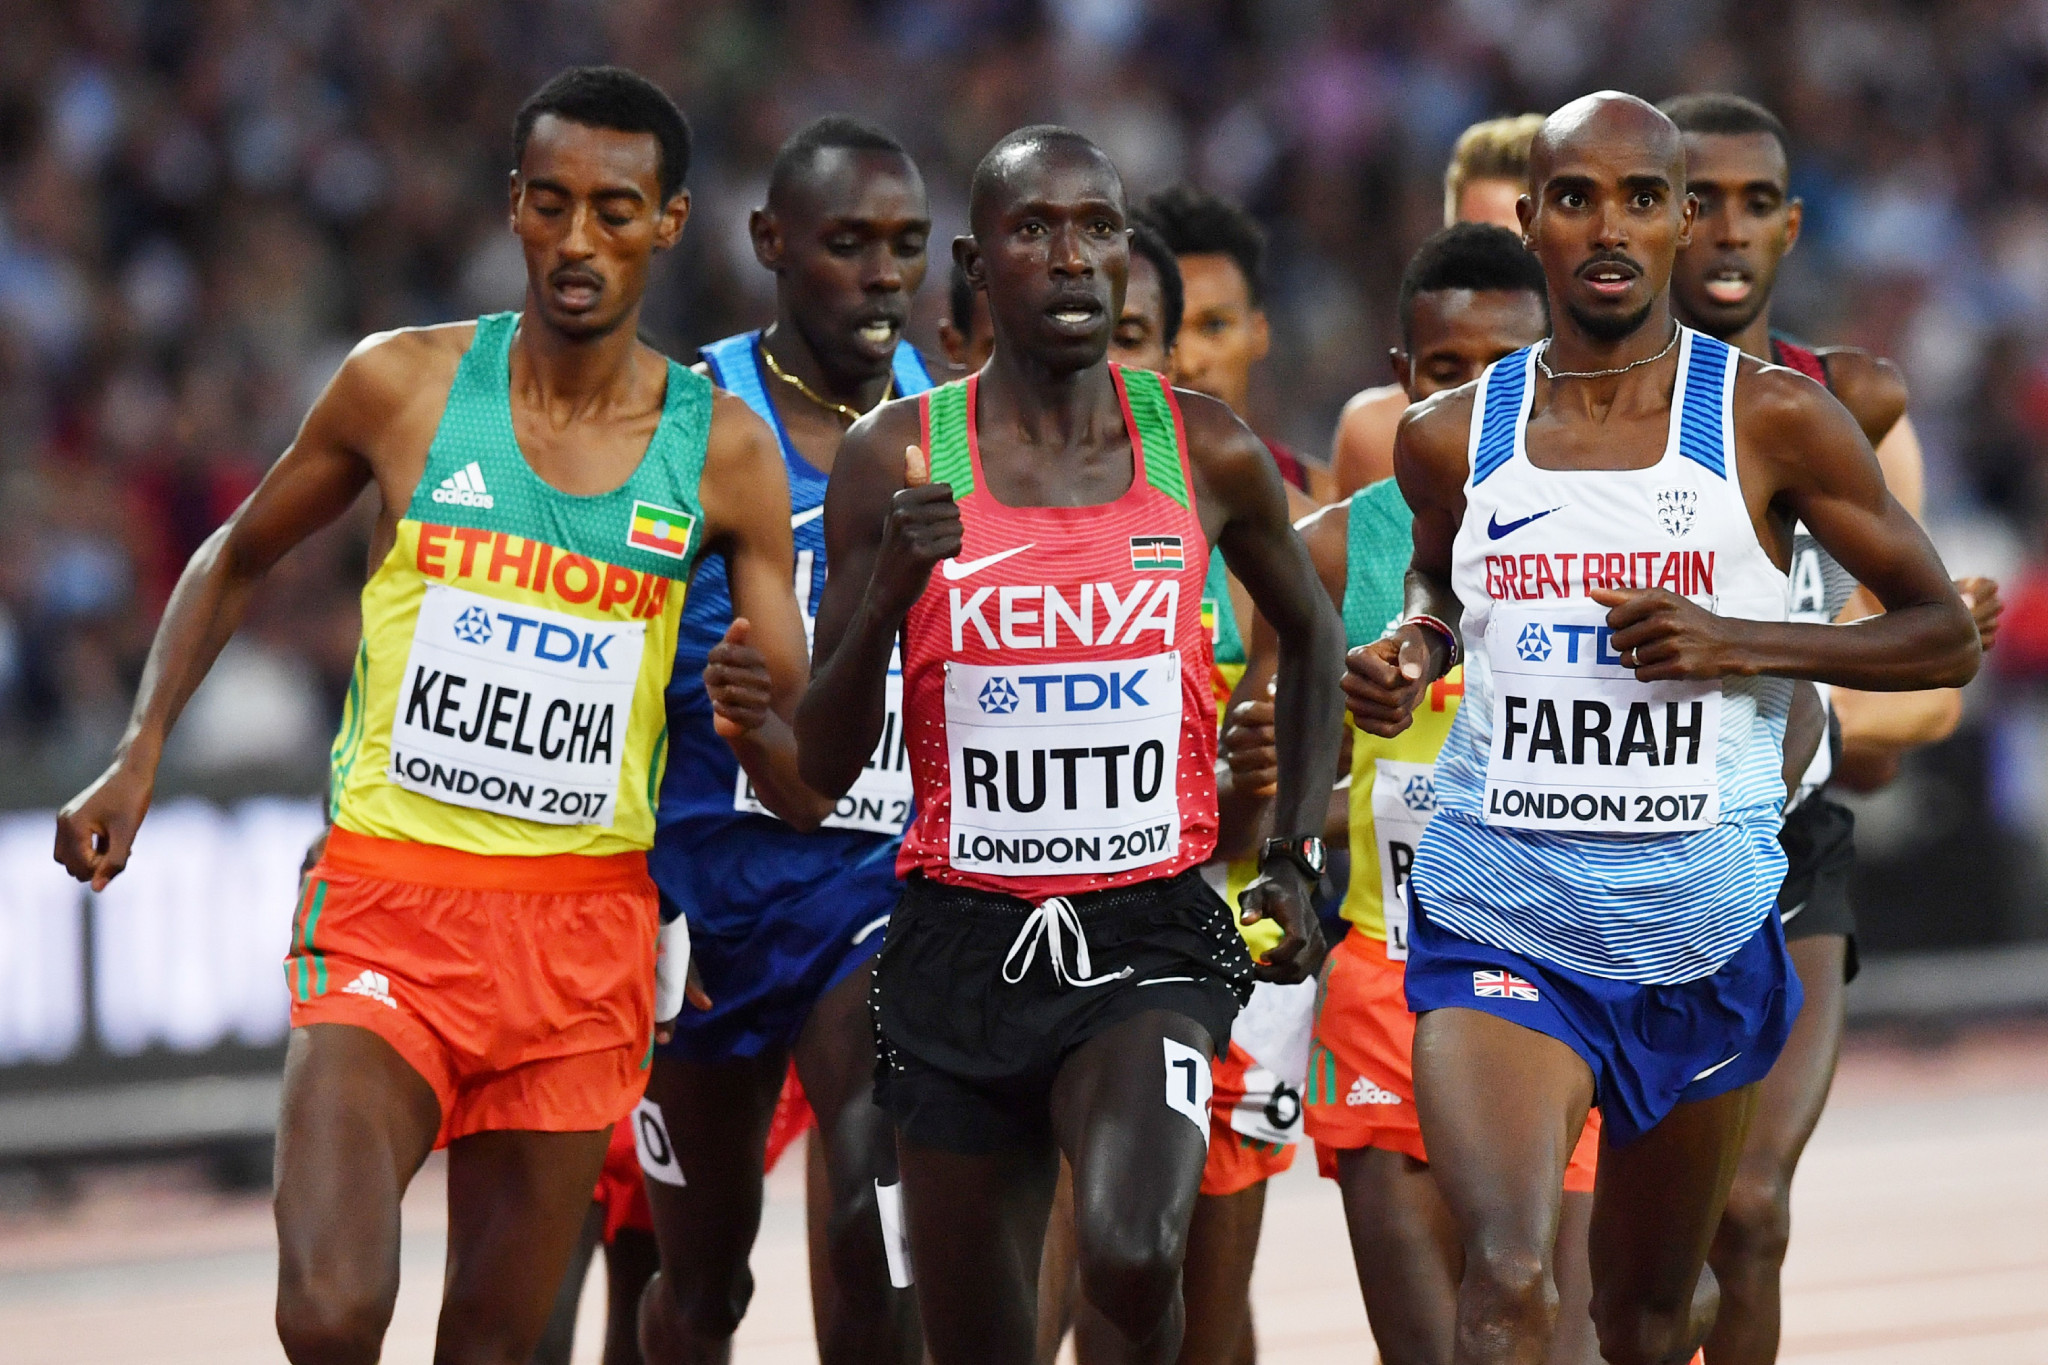 Cyrus Rutto recently became the latest Kenyan runner to be banned for four years by the Athletics Integrity Unit after testing positive for banned performance-enhancing drugs ©Getty Images